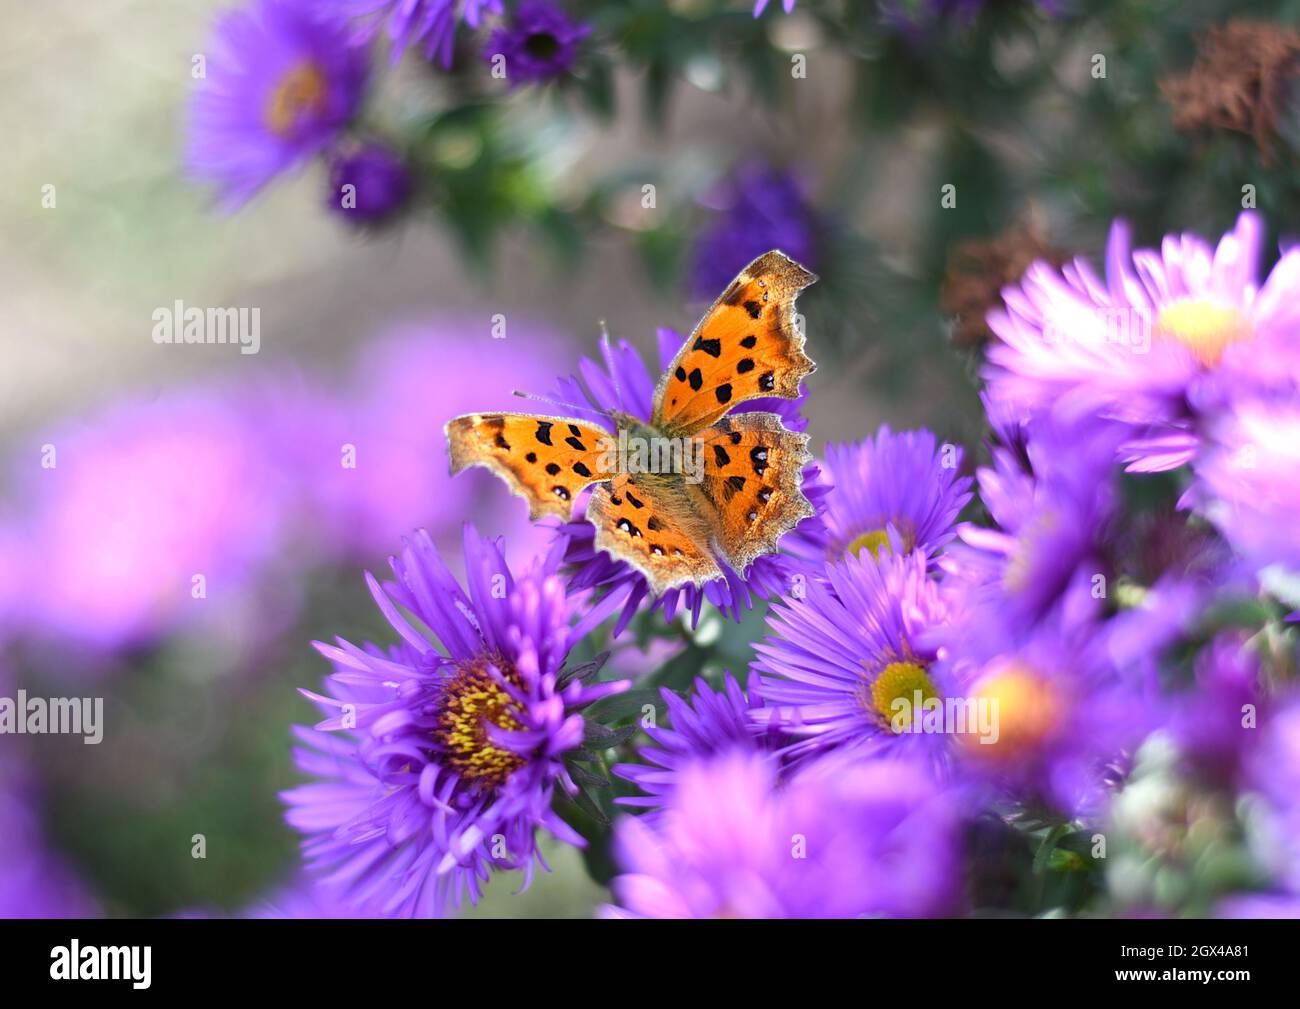 The Comma or Polygonia c-album butterfly on Japanese aster (Kalimeris incisa) Stock Photo